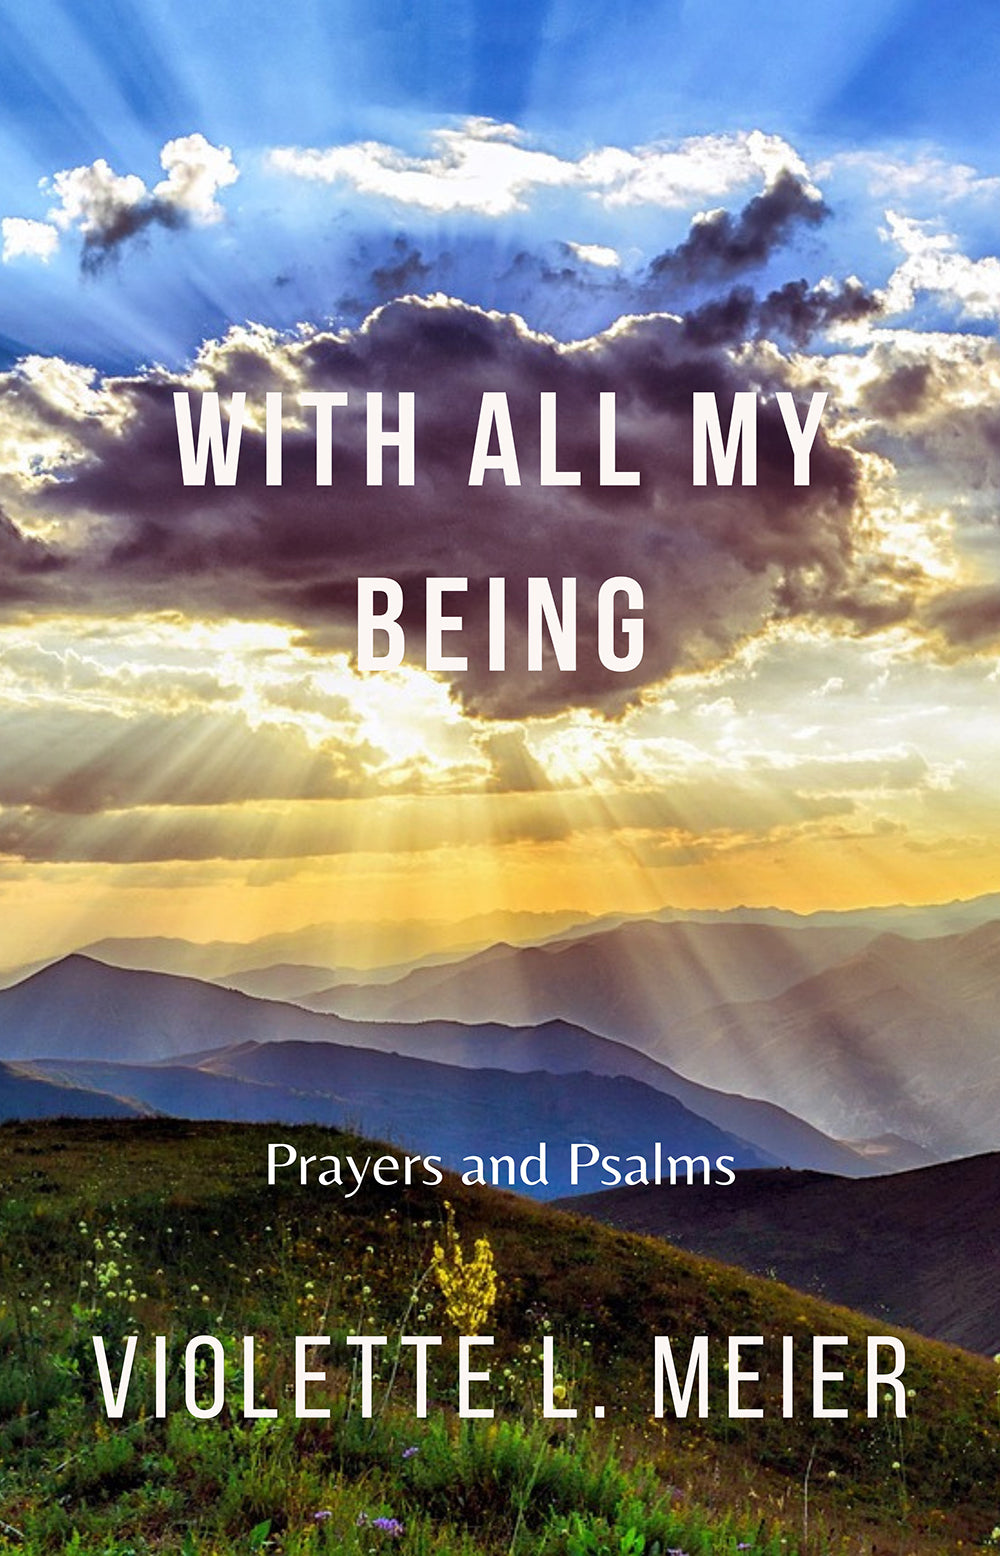 With All My Being: Prayers and Psalms